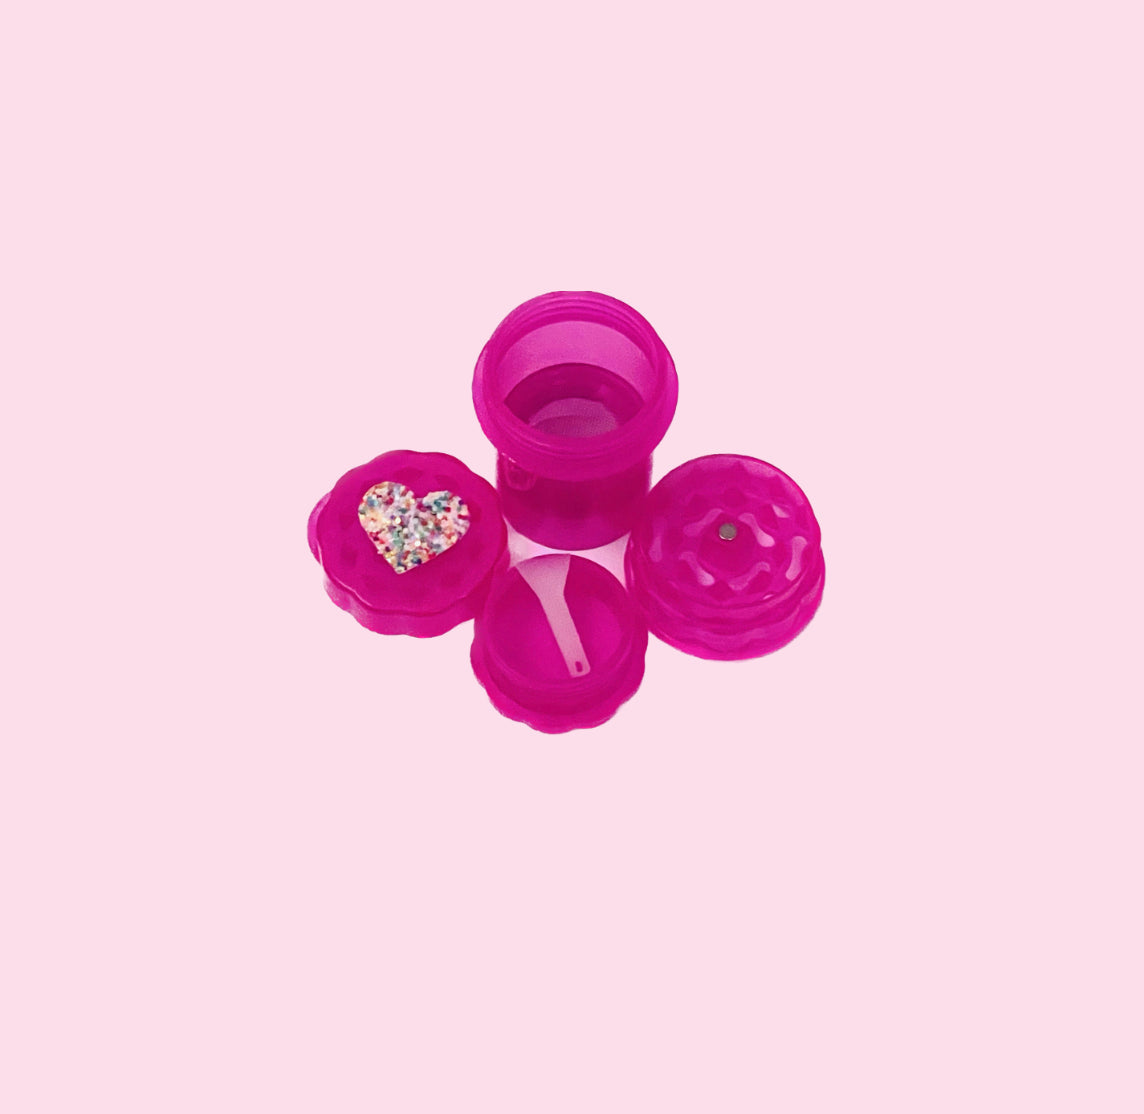 2.5" Pink 4 piece grinder with Heart